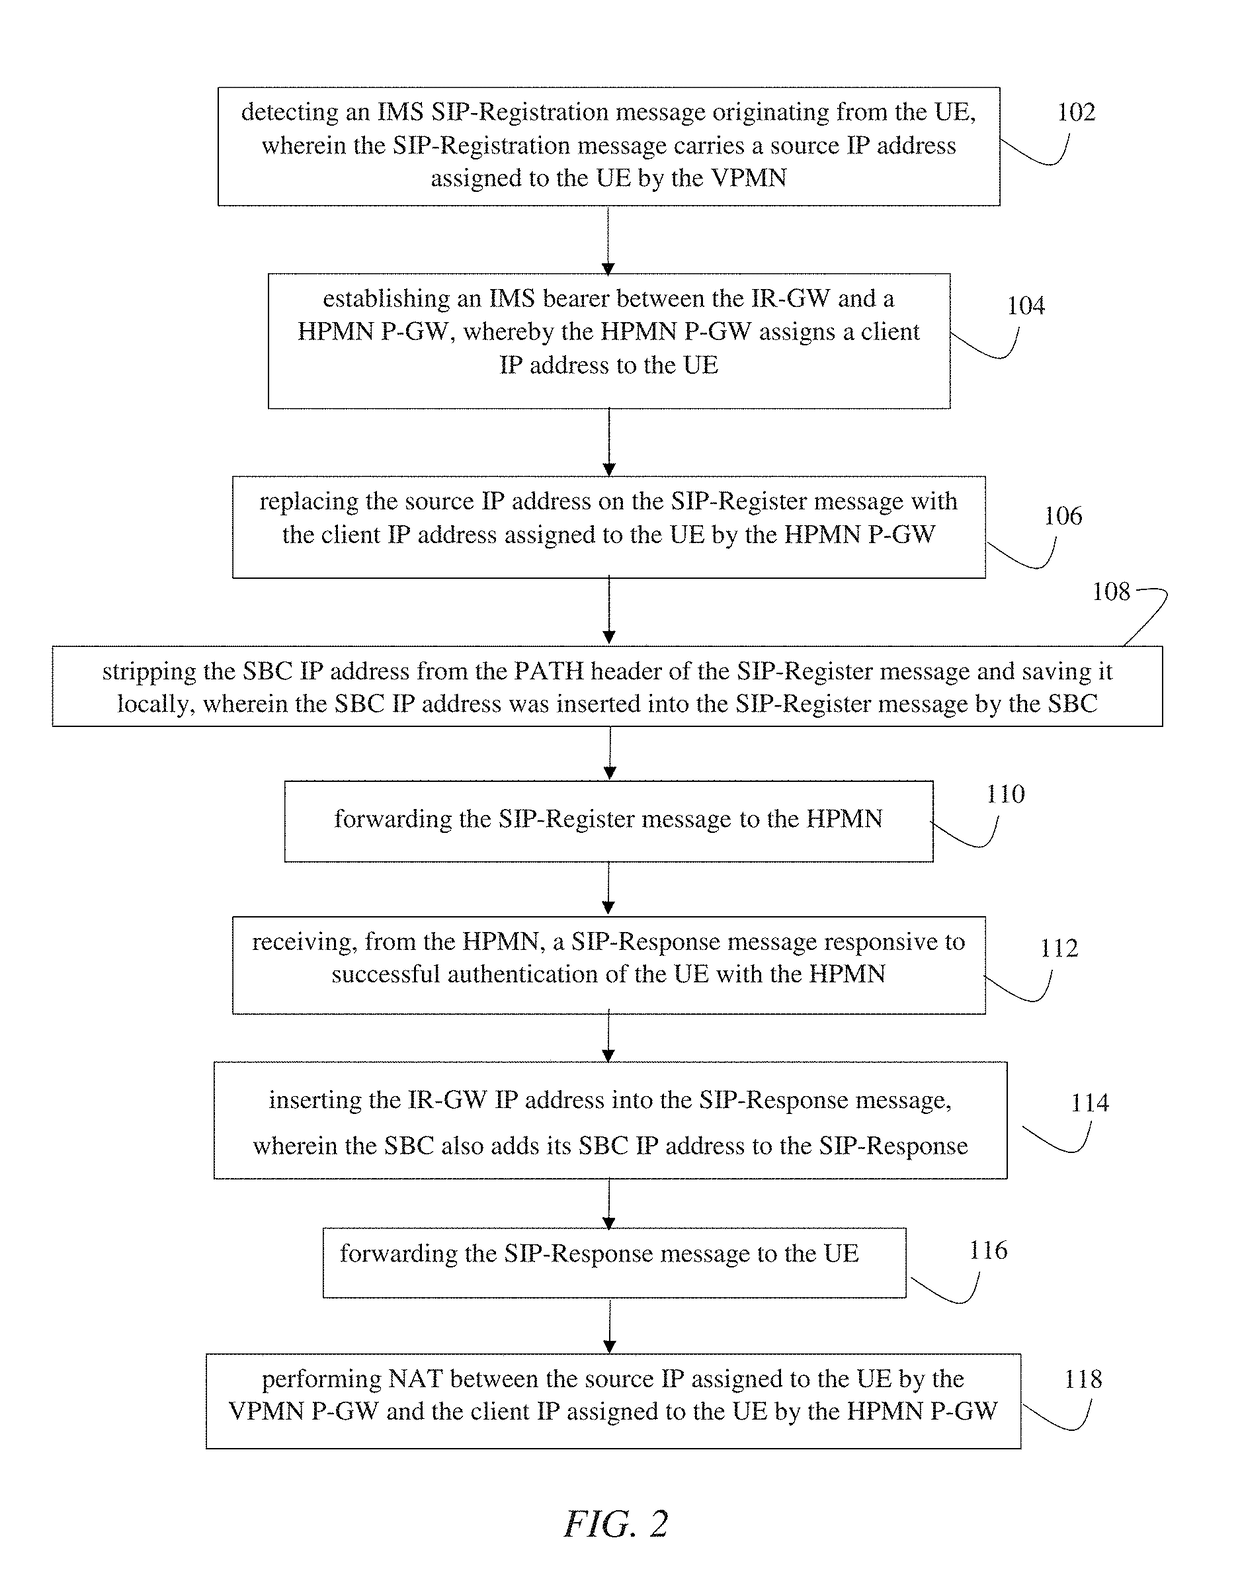 Method for providing roaming services in which the home network uses S8HR model for out-bound roaming while the visited network uses LBO model for in-bound roaming